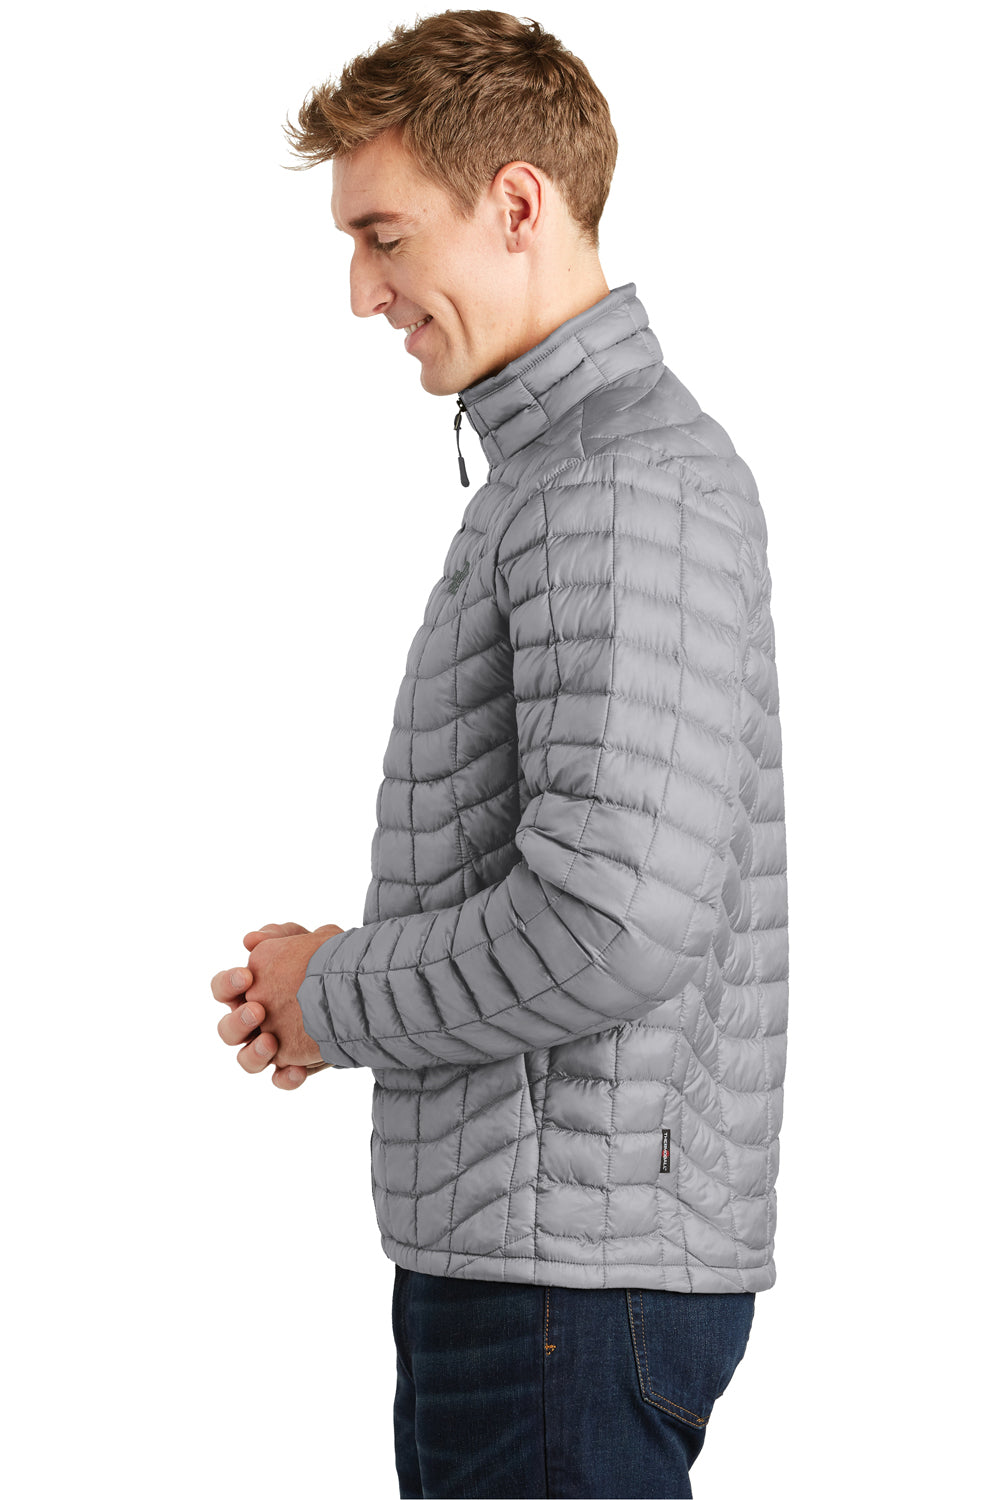 The North Face NF0A3LH2 Mens ThermoBall Trekker Water Resistant Full Zip Jacket Mid Grey Side